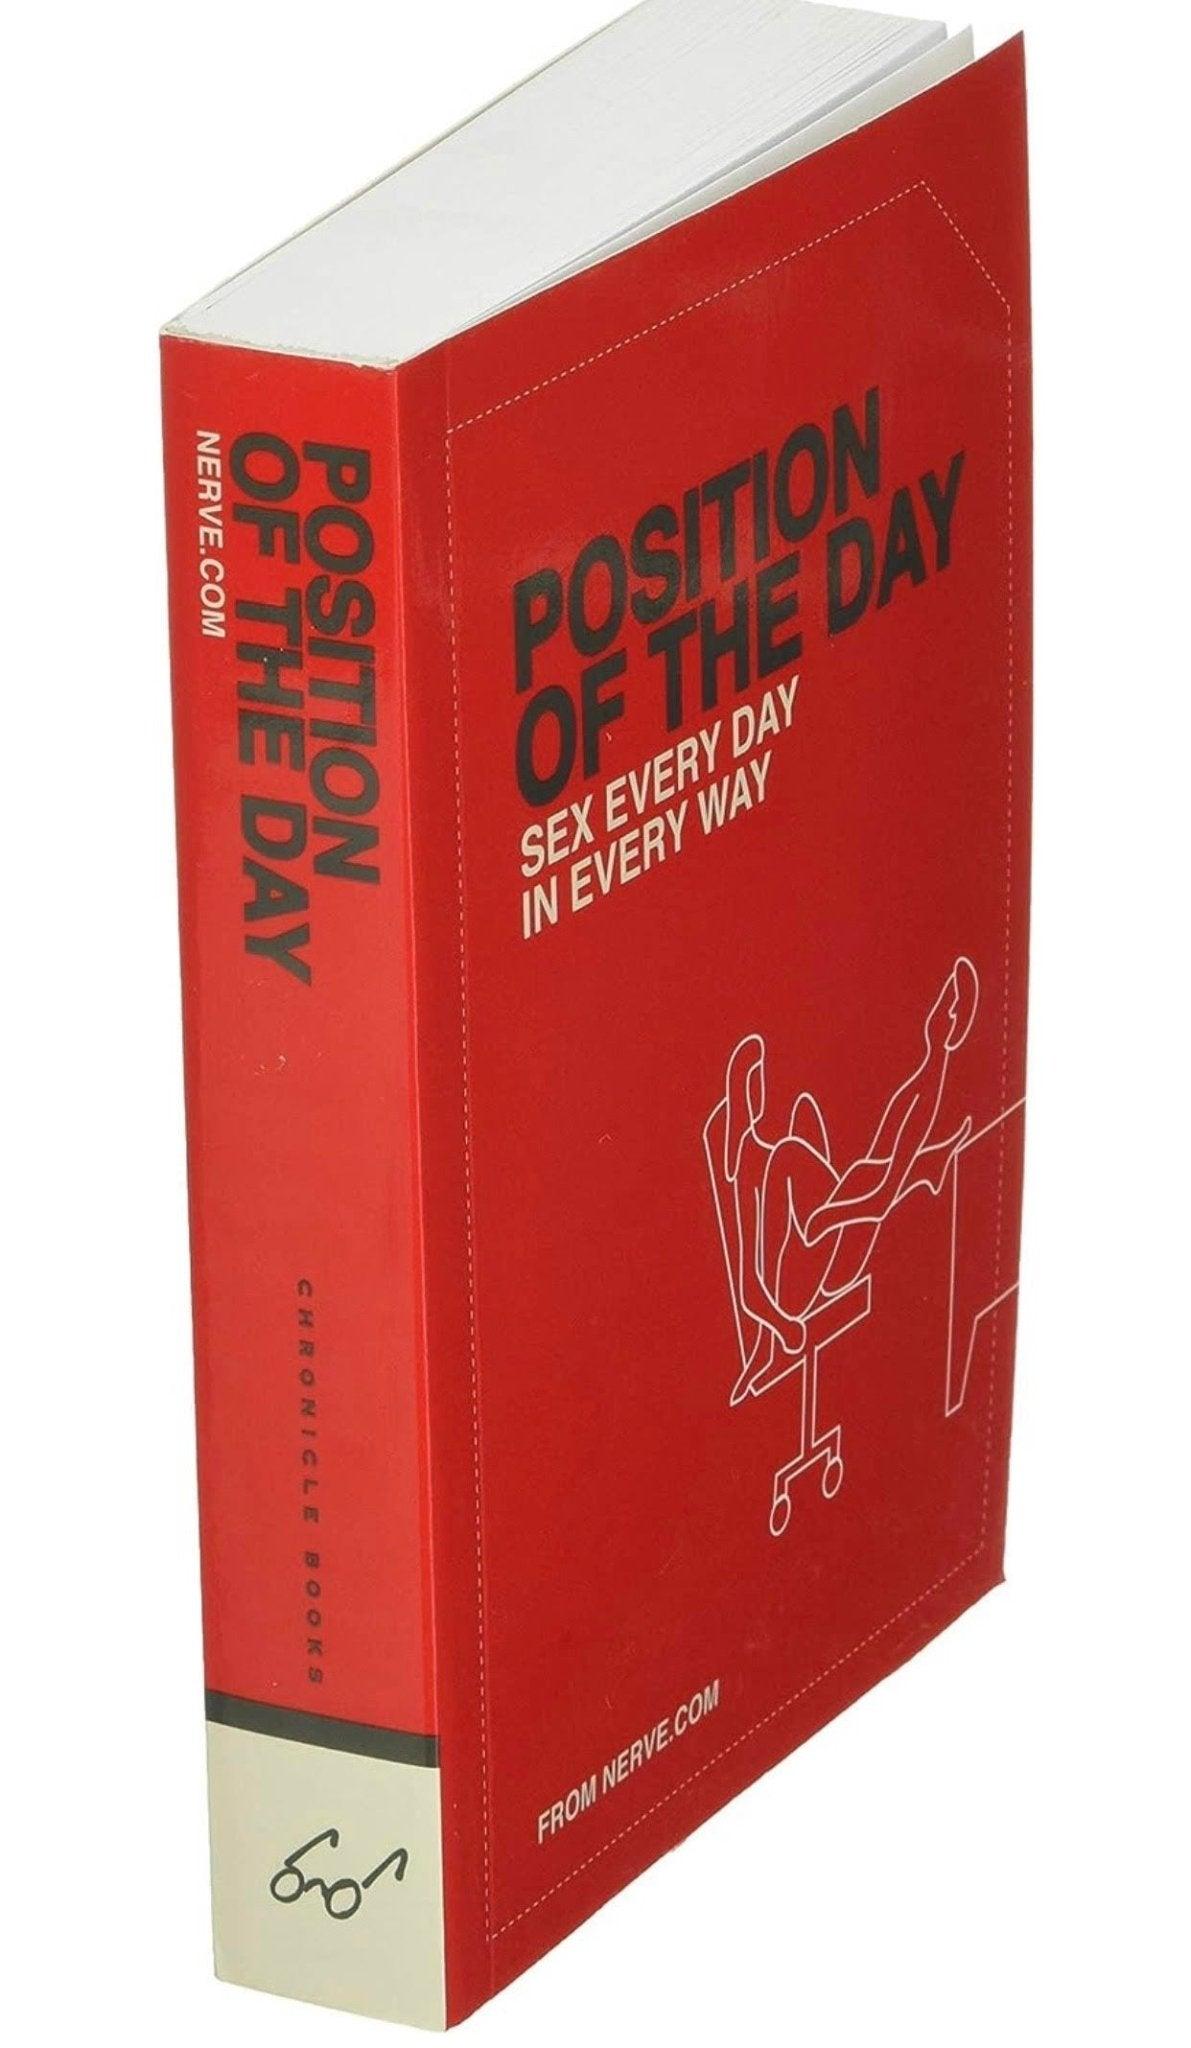 Position Of The Day - Sex Book - NRN Specialties